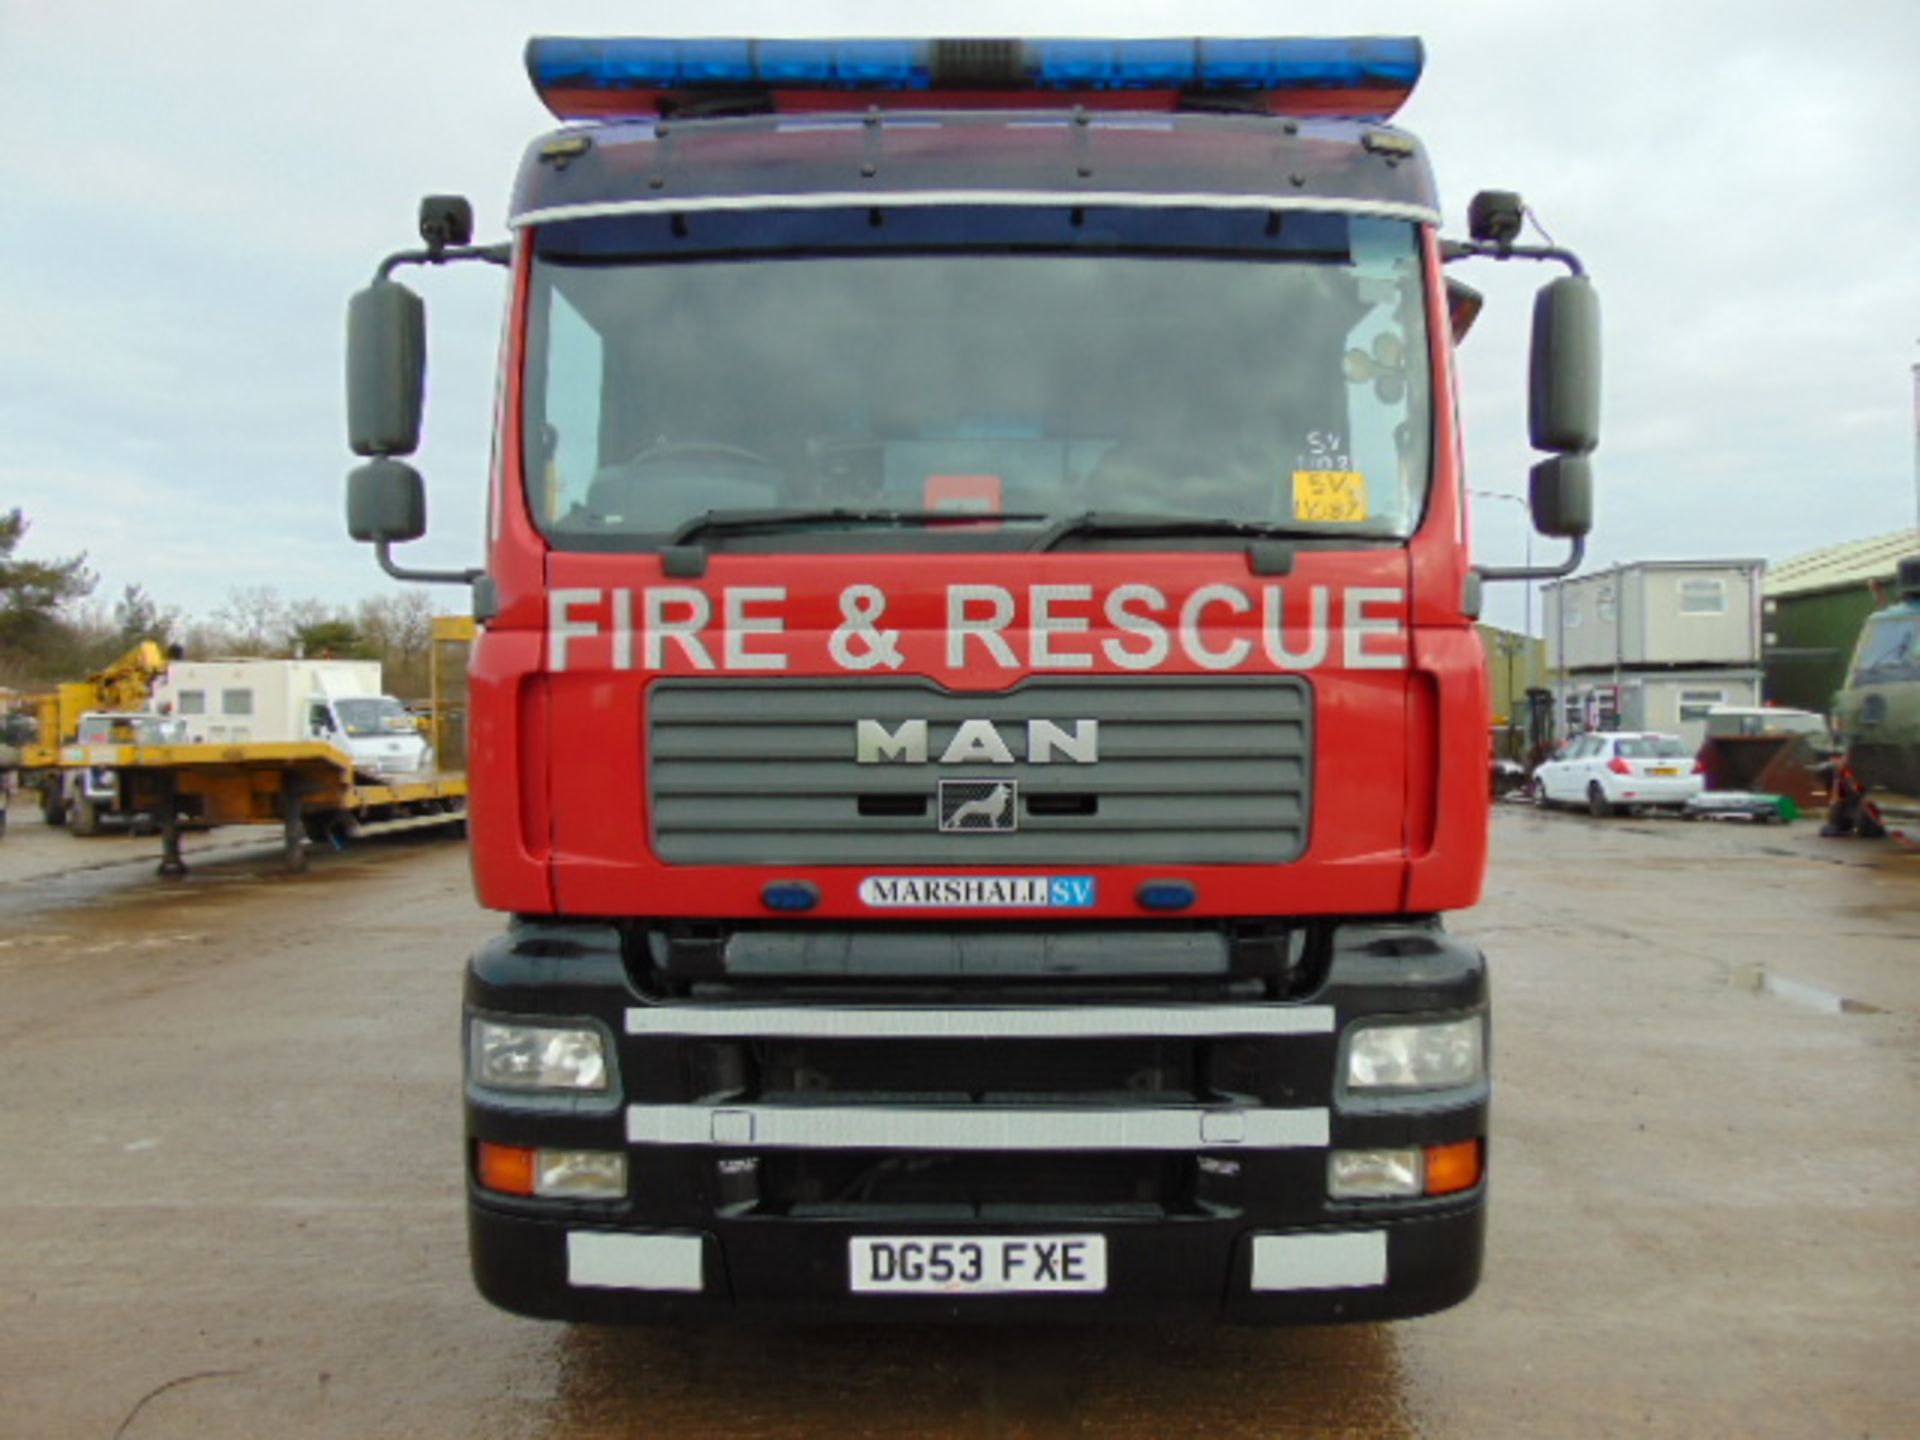 2004 MAN TG-A 6x2 Incident Support Unit - Image 2 of 26